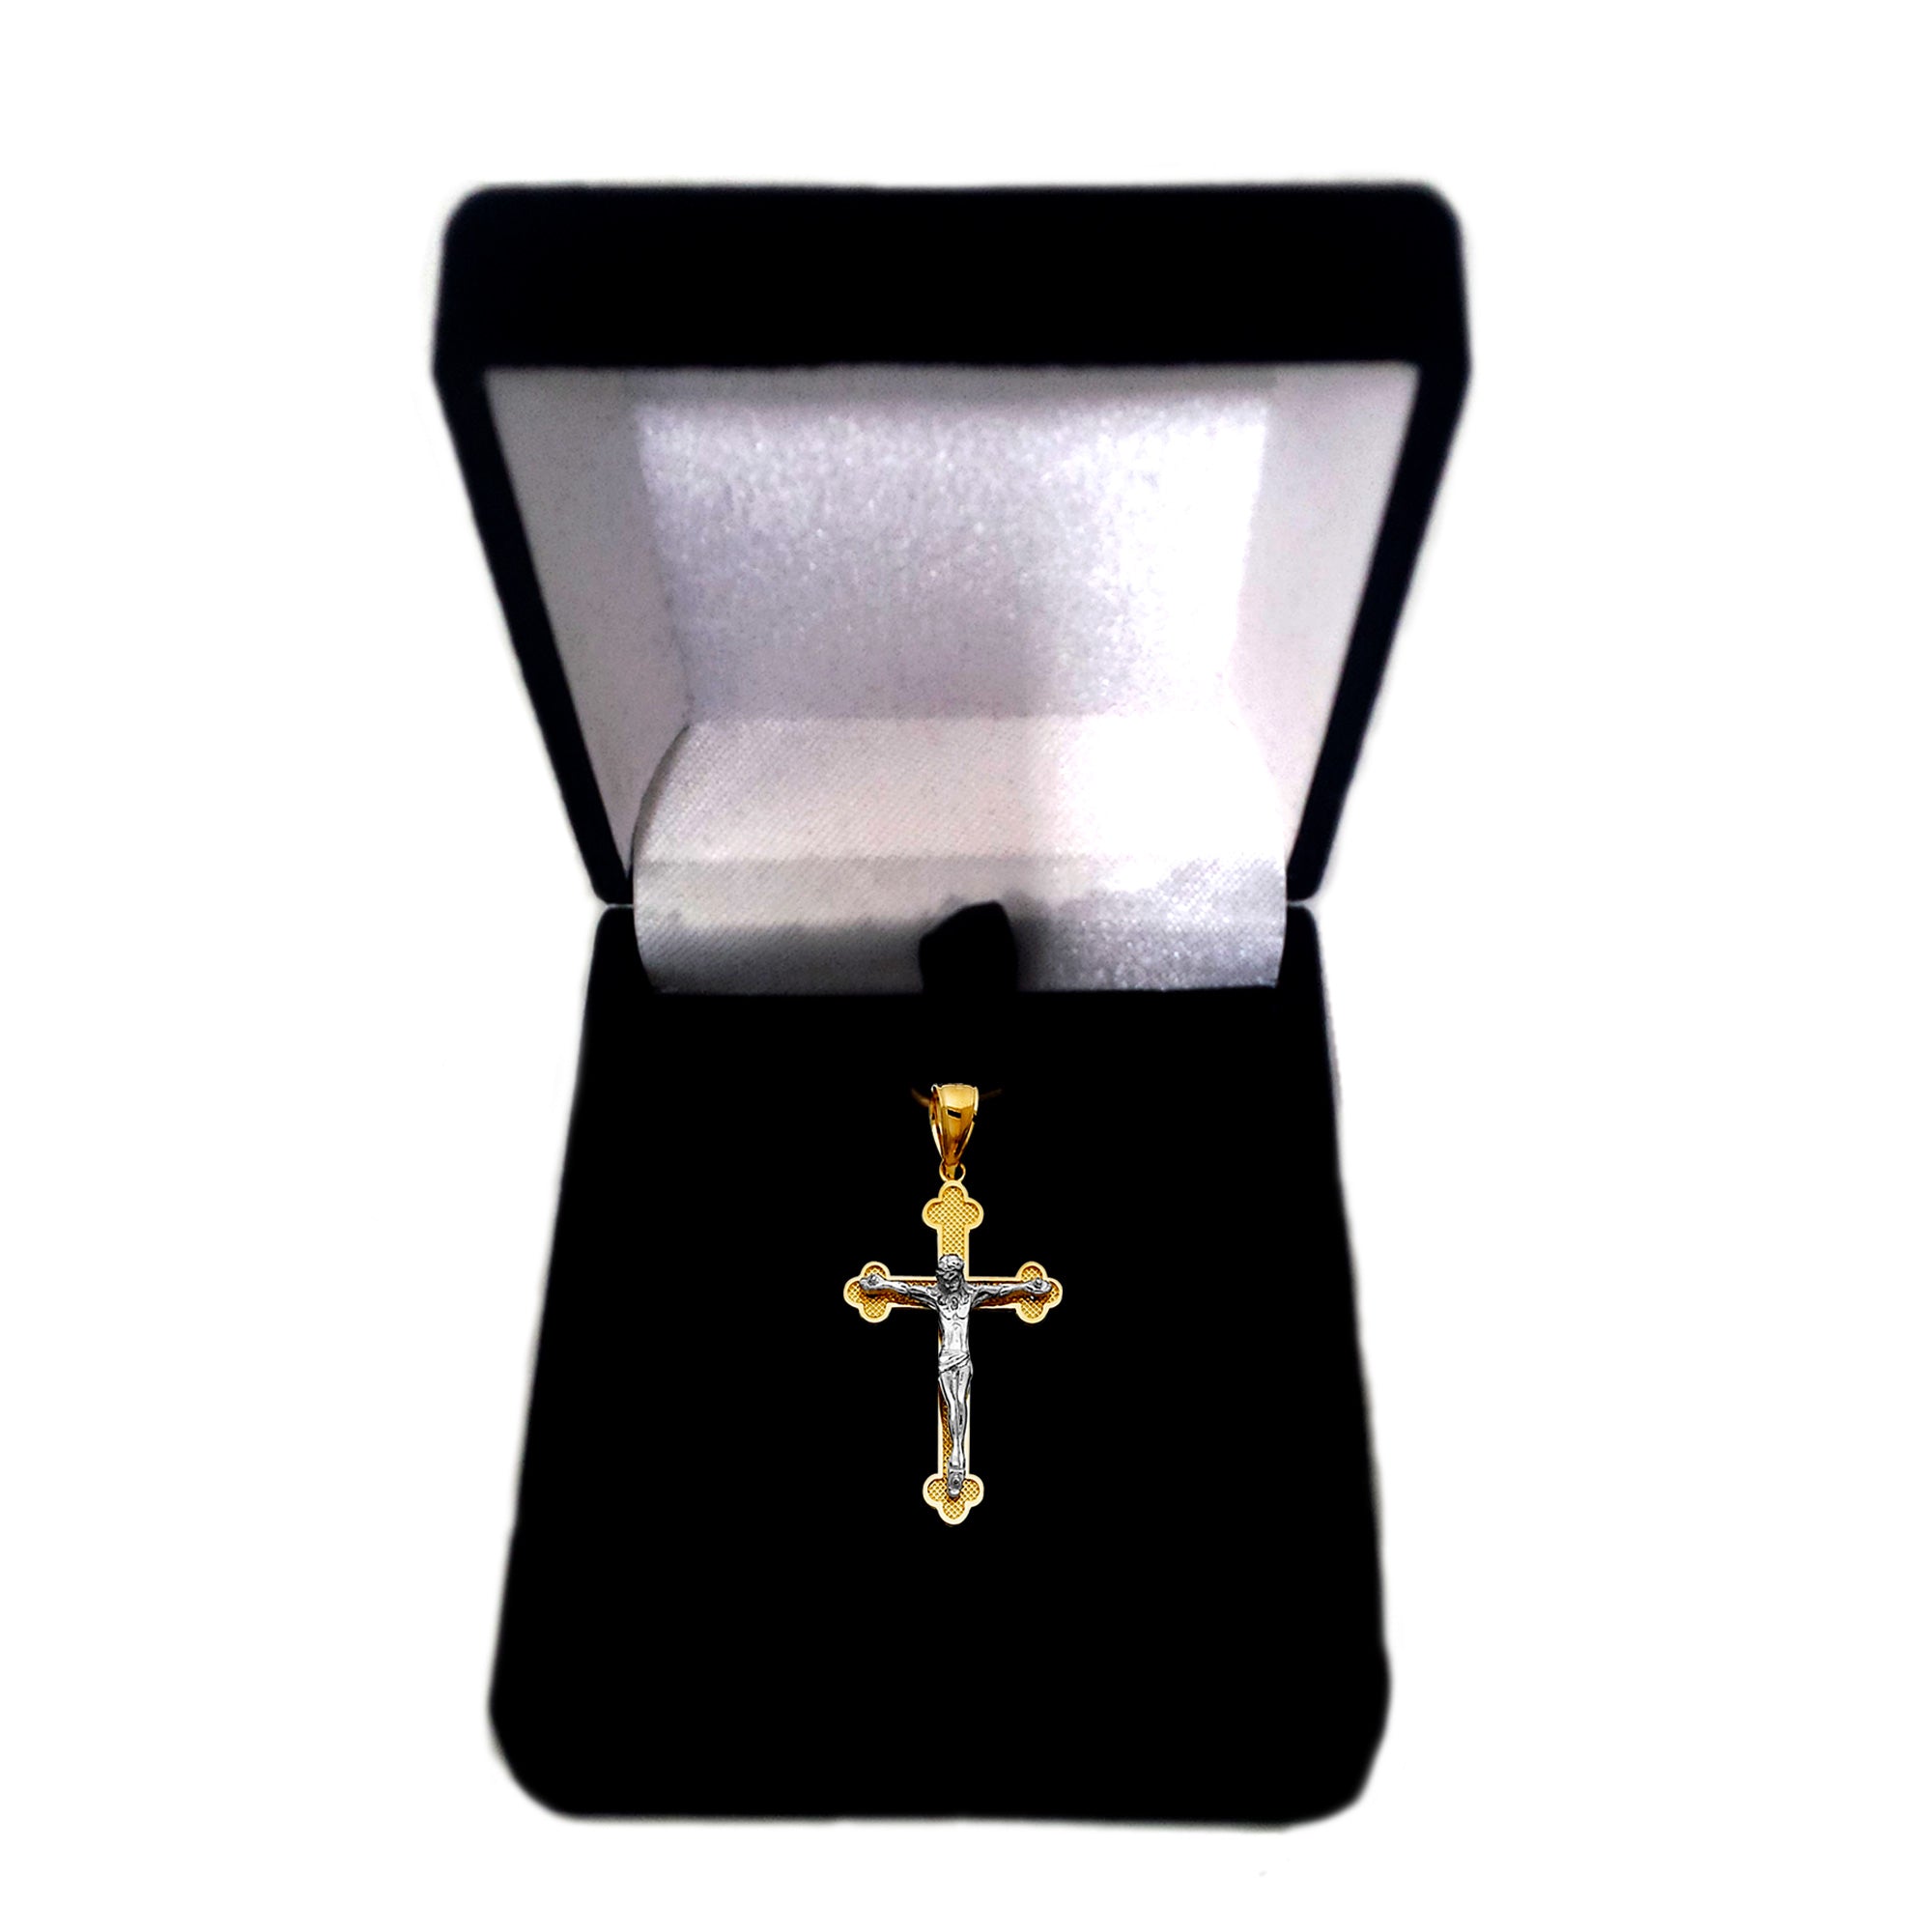 14k 2 Tone Gold Textured Finish Clover Tips Crucifix Pendant fine designer jewelry for men and women